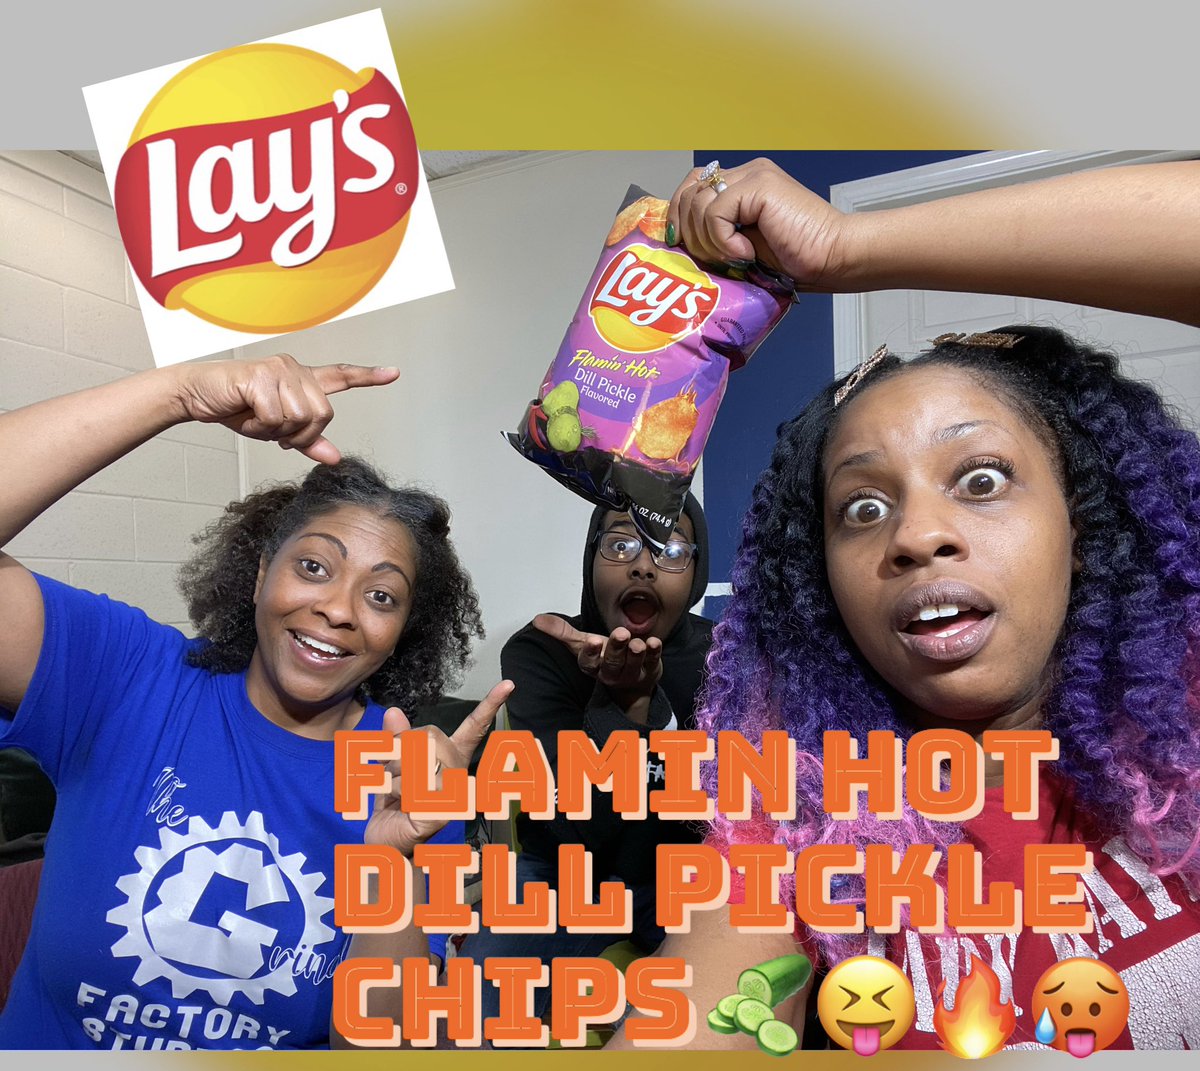 🥒🥵😝🔥
New #MajorShenanigans snack review of “Lay’s Flamin Hot Dill Pickle” Potato Chips ft @ladykayne @MJKaneBooks @2kautious20 ⚙️⚙️⚙️
Full video on @YouTube ✅

youtu.be/4rsMWf8jrx4

#snackreview #lays #flaminhot #dillpickle #flaminhotdillpickle